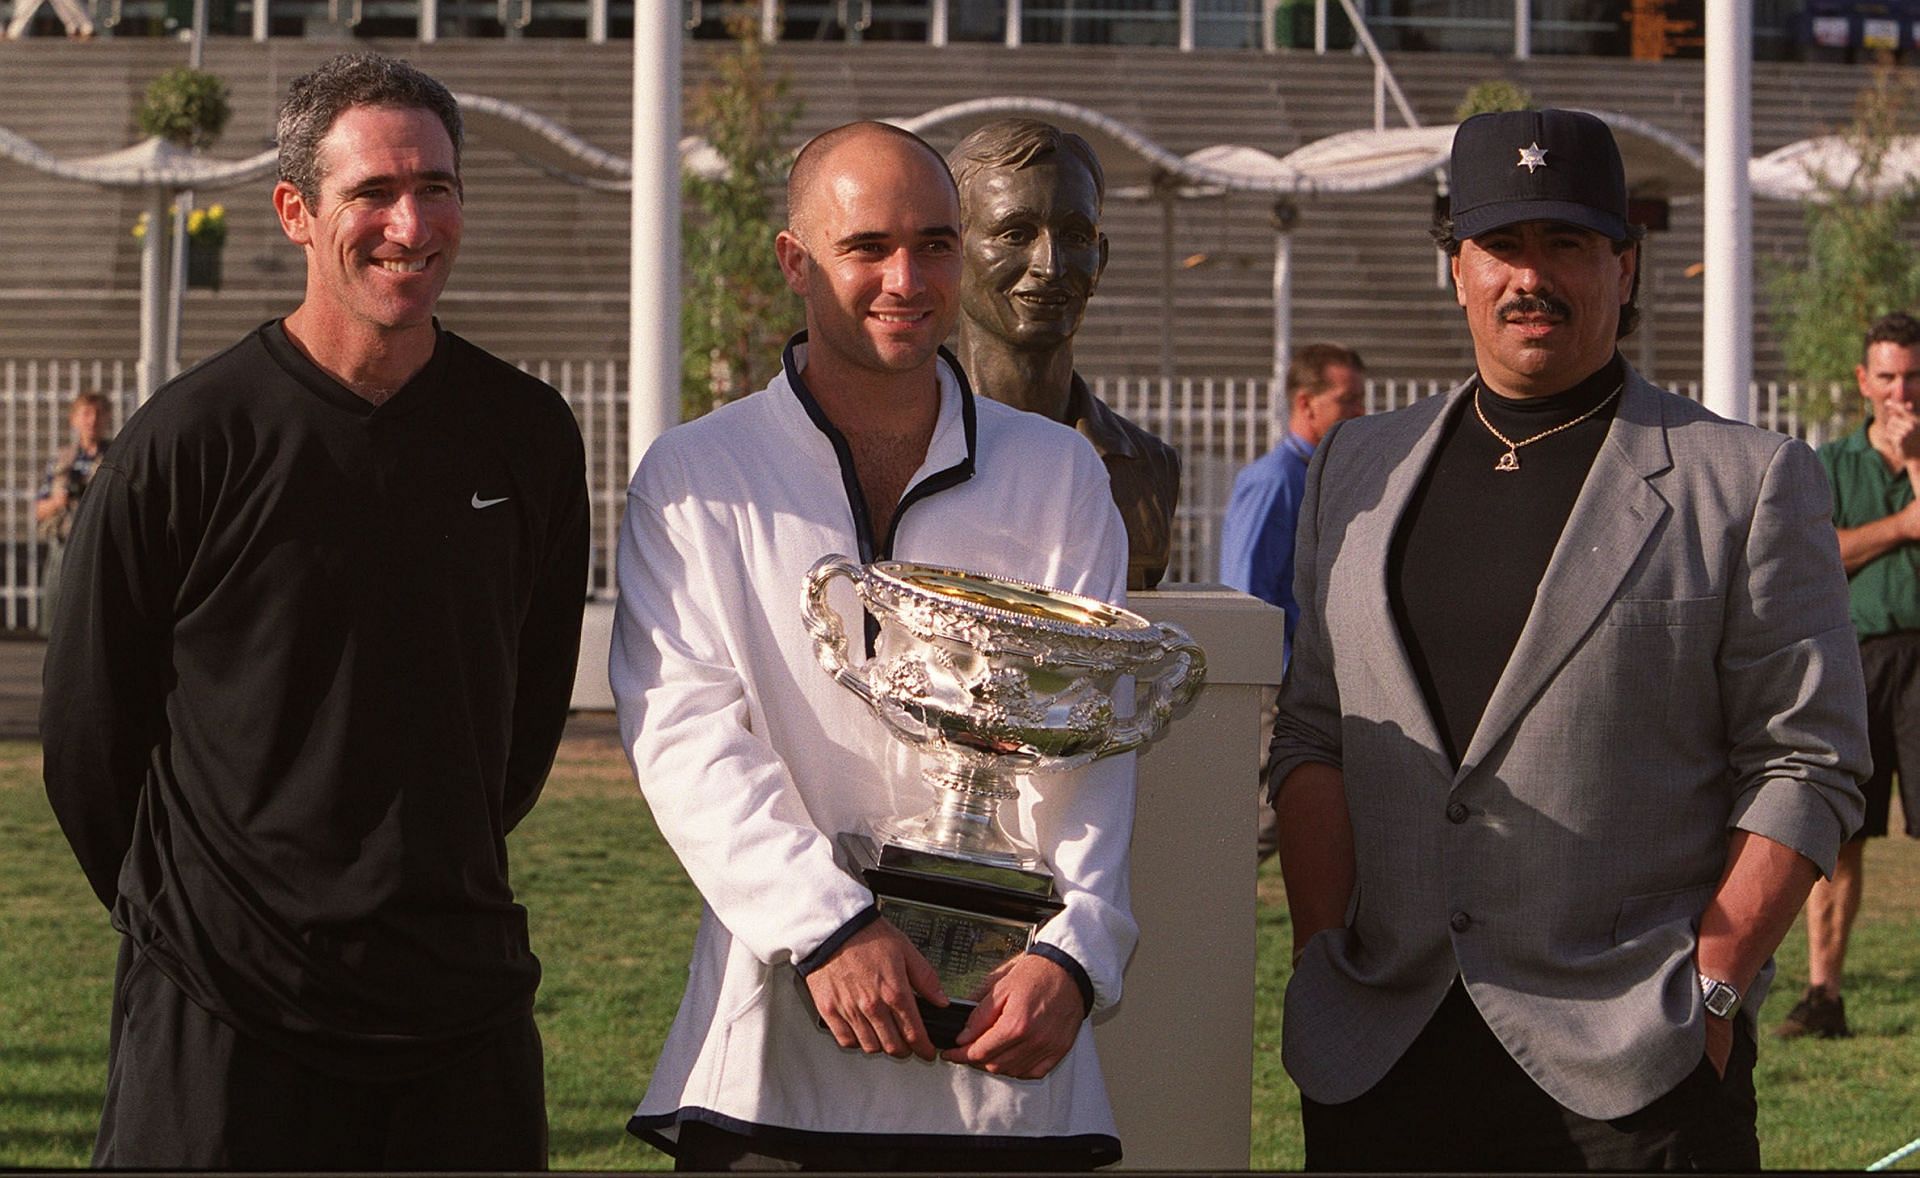 Andre Agassi and former coach Brad Gilbert (L) pose with the 2000 Australian Open trophy.